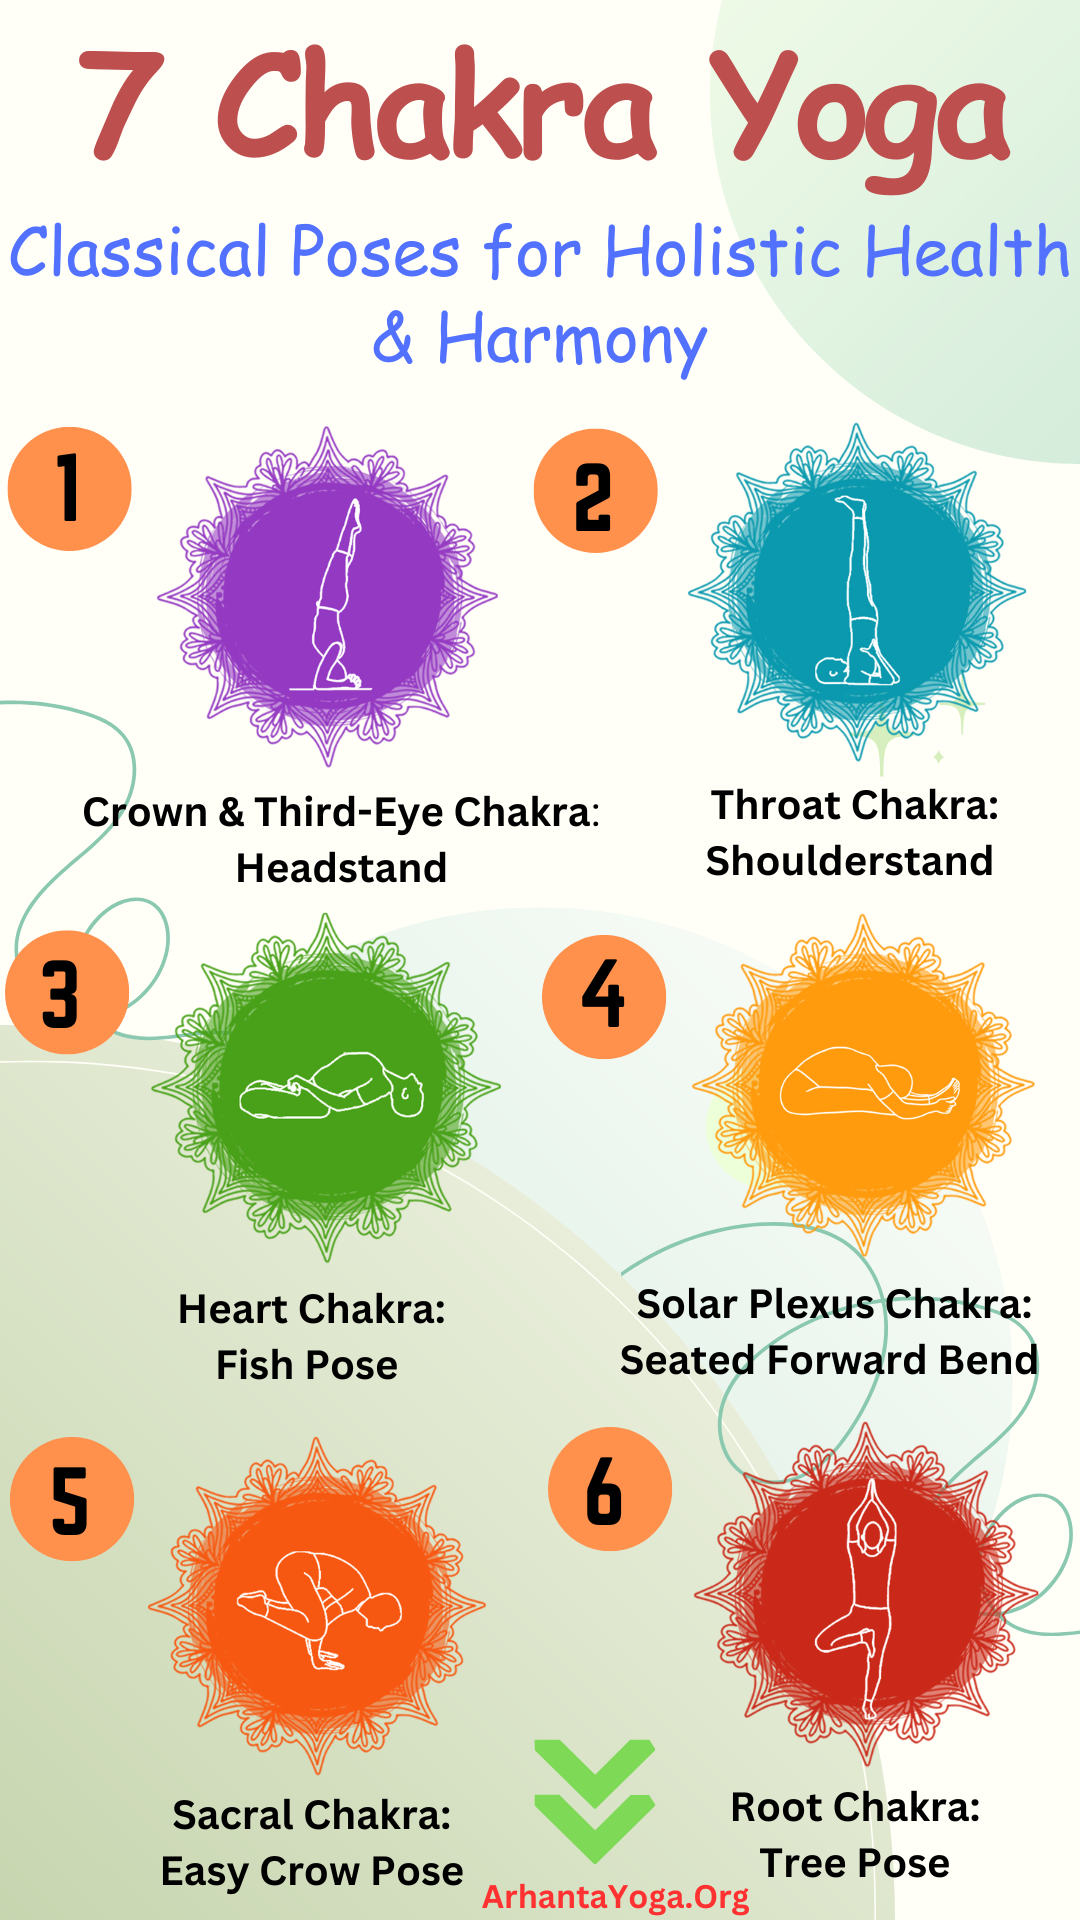 7 Chakra Yoga: Classical Poses for Holistic Health by walkermartin